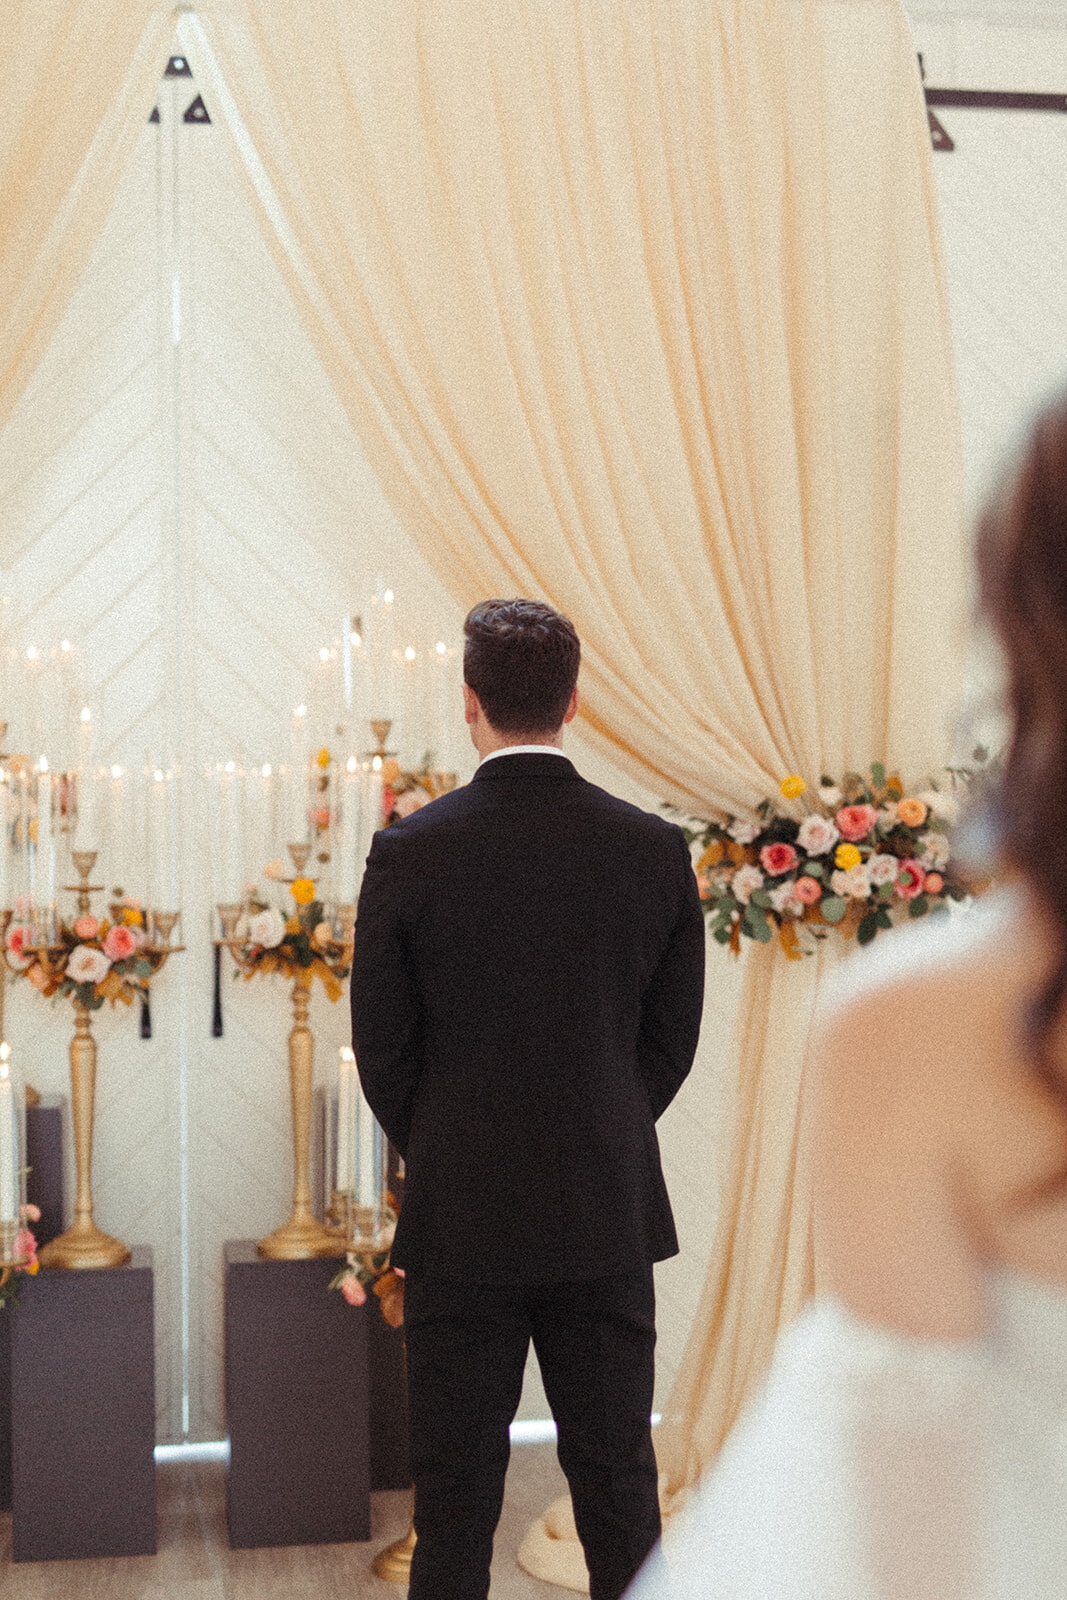 Back image of a bride wearing a white wedding gown looking at groom wearing a black tuxedo standing at the altar.